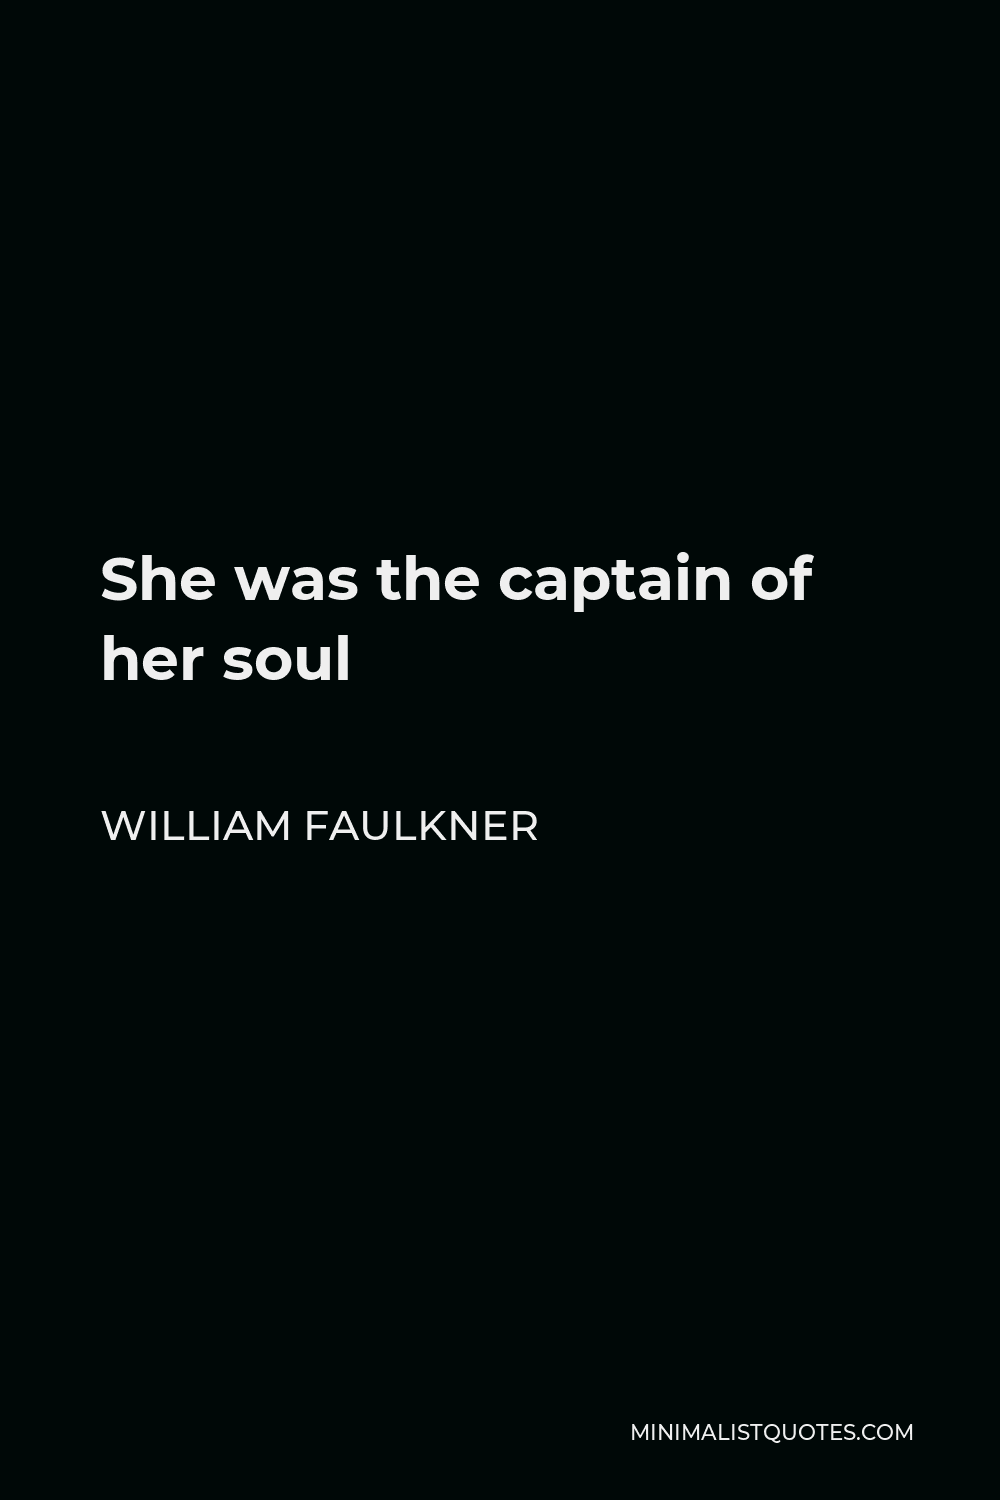 William Faulkner Quote - She was the captain of her soul